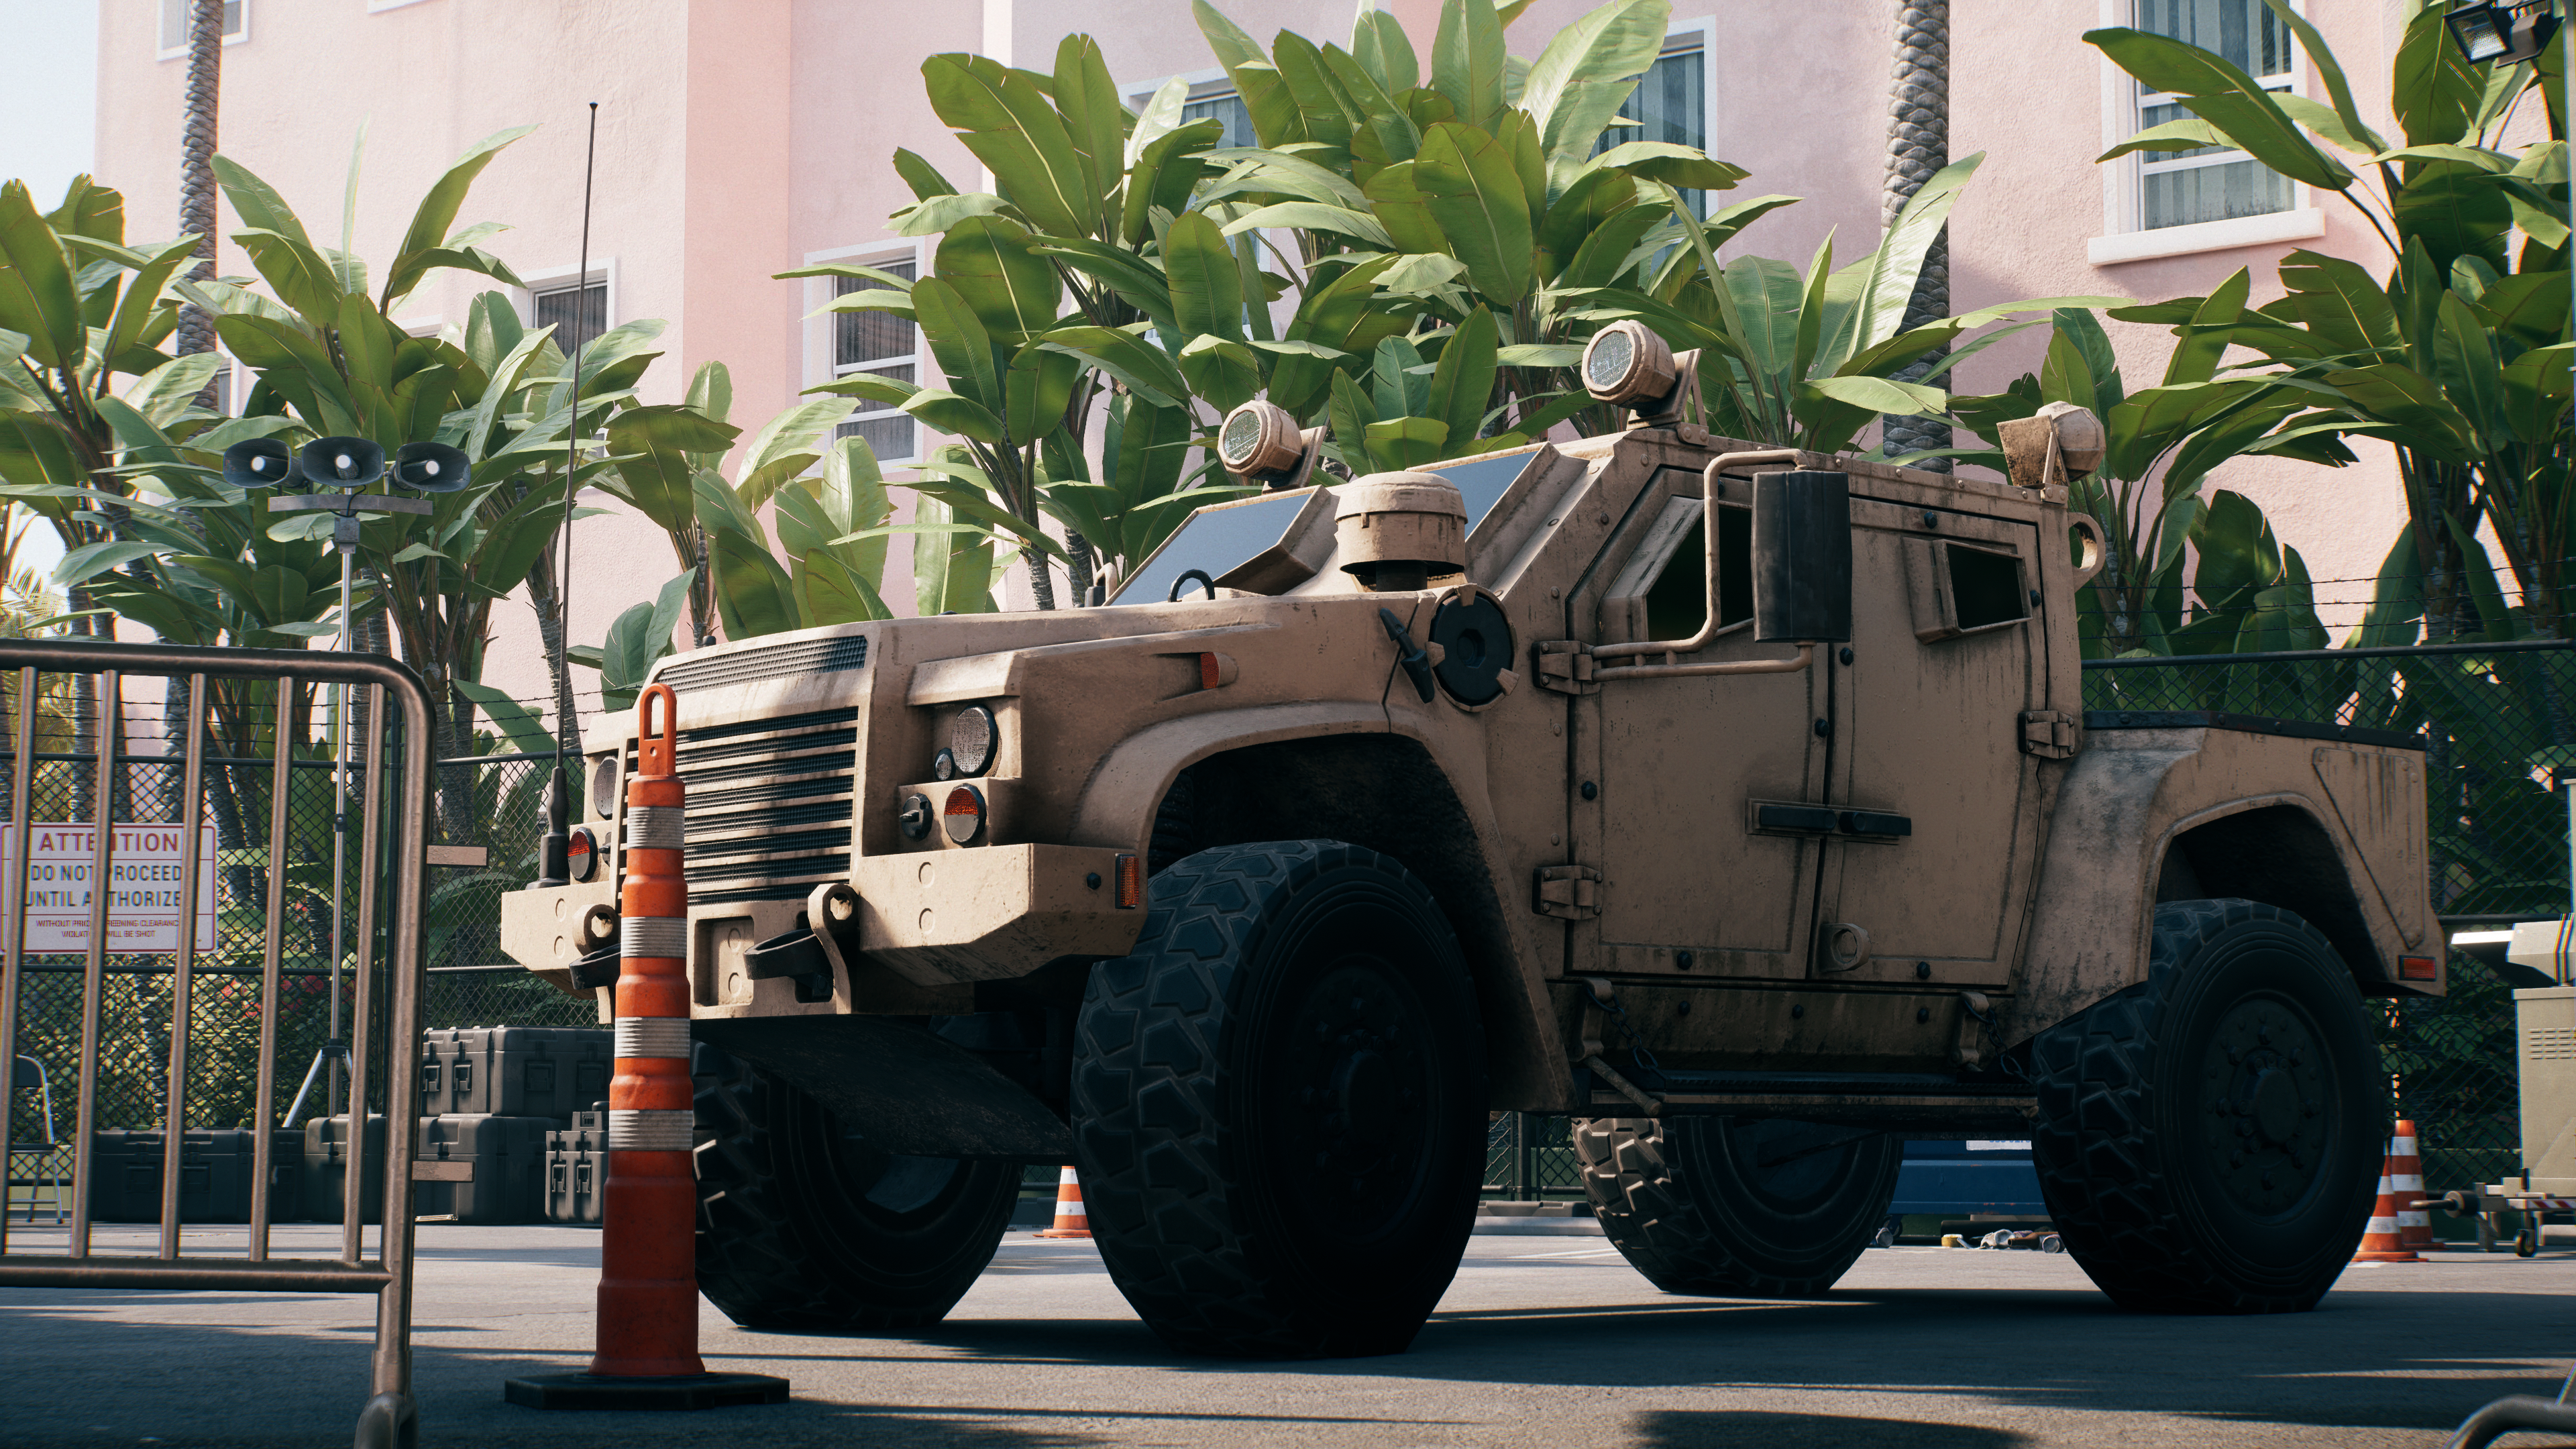 General 3840x2160 Dead Island 2 Nvidia RTX video games CGI vehicle frontal view leaves fence sign building traffic cone